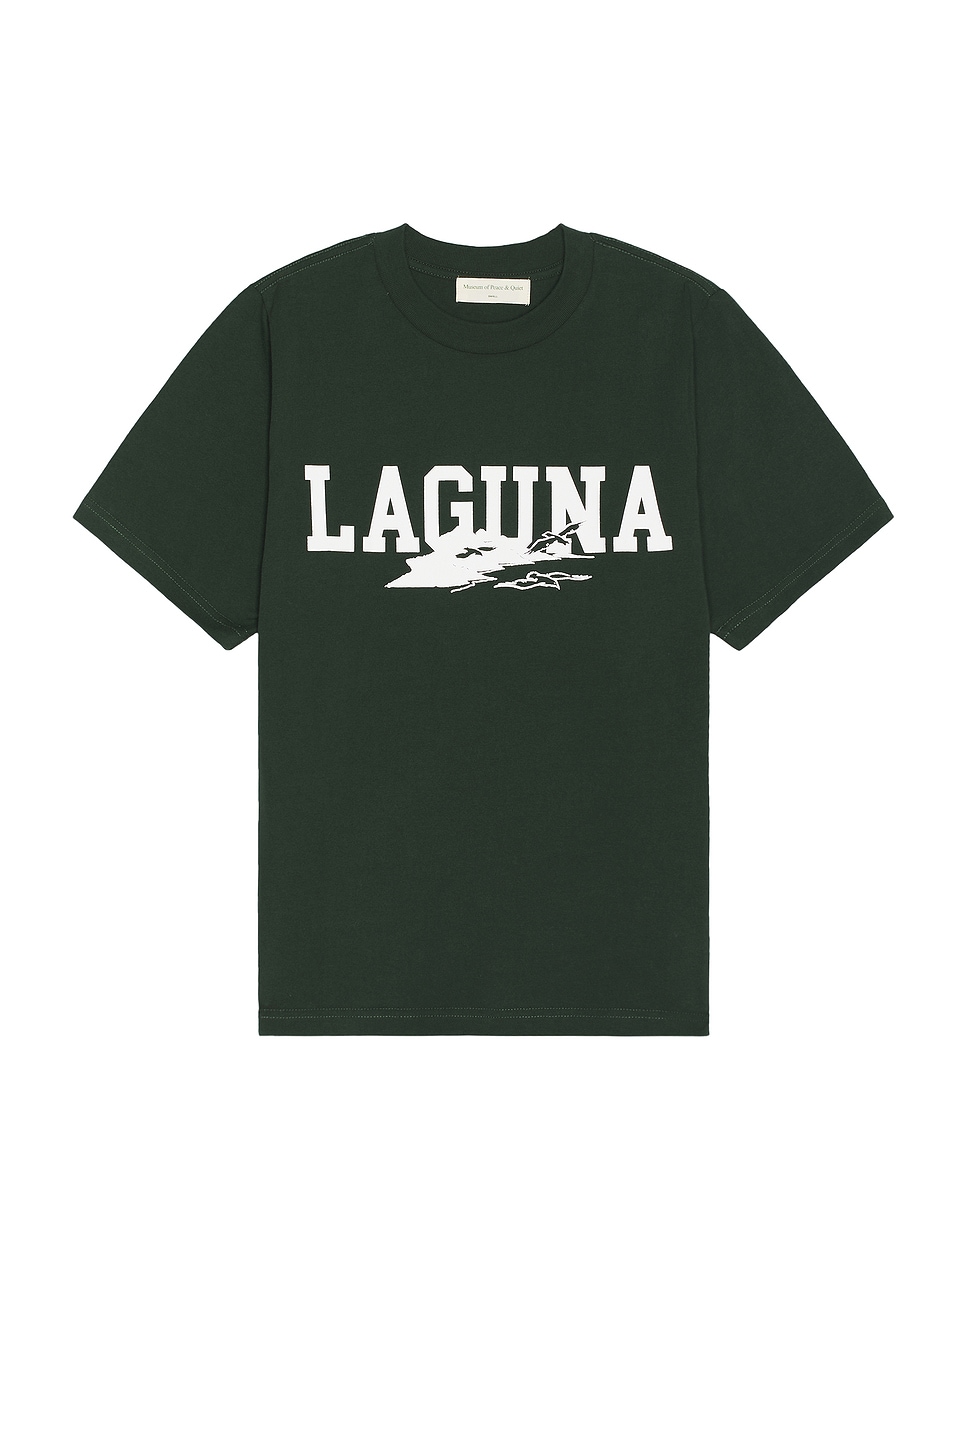 Image 1 of Museum of Peace and Quiet Laguna T-Shirt in Forest